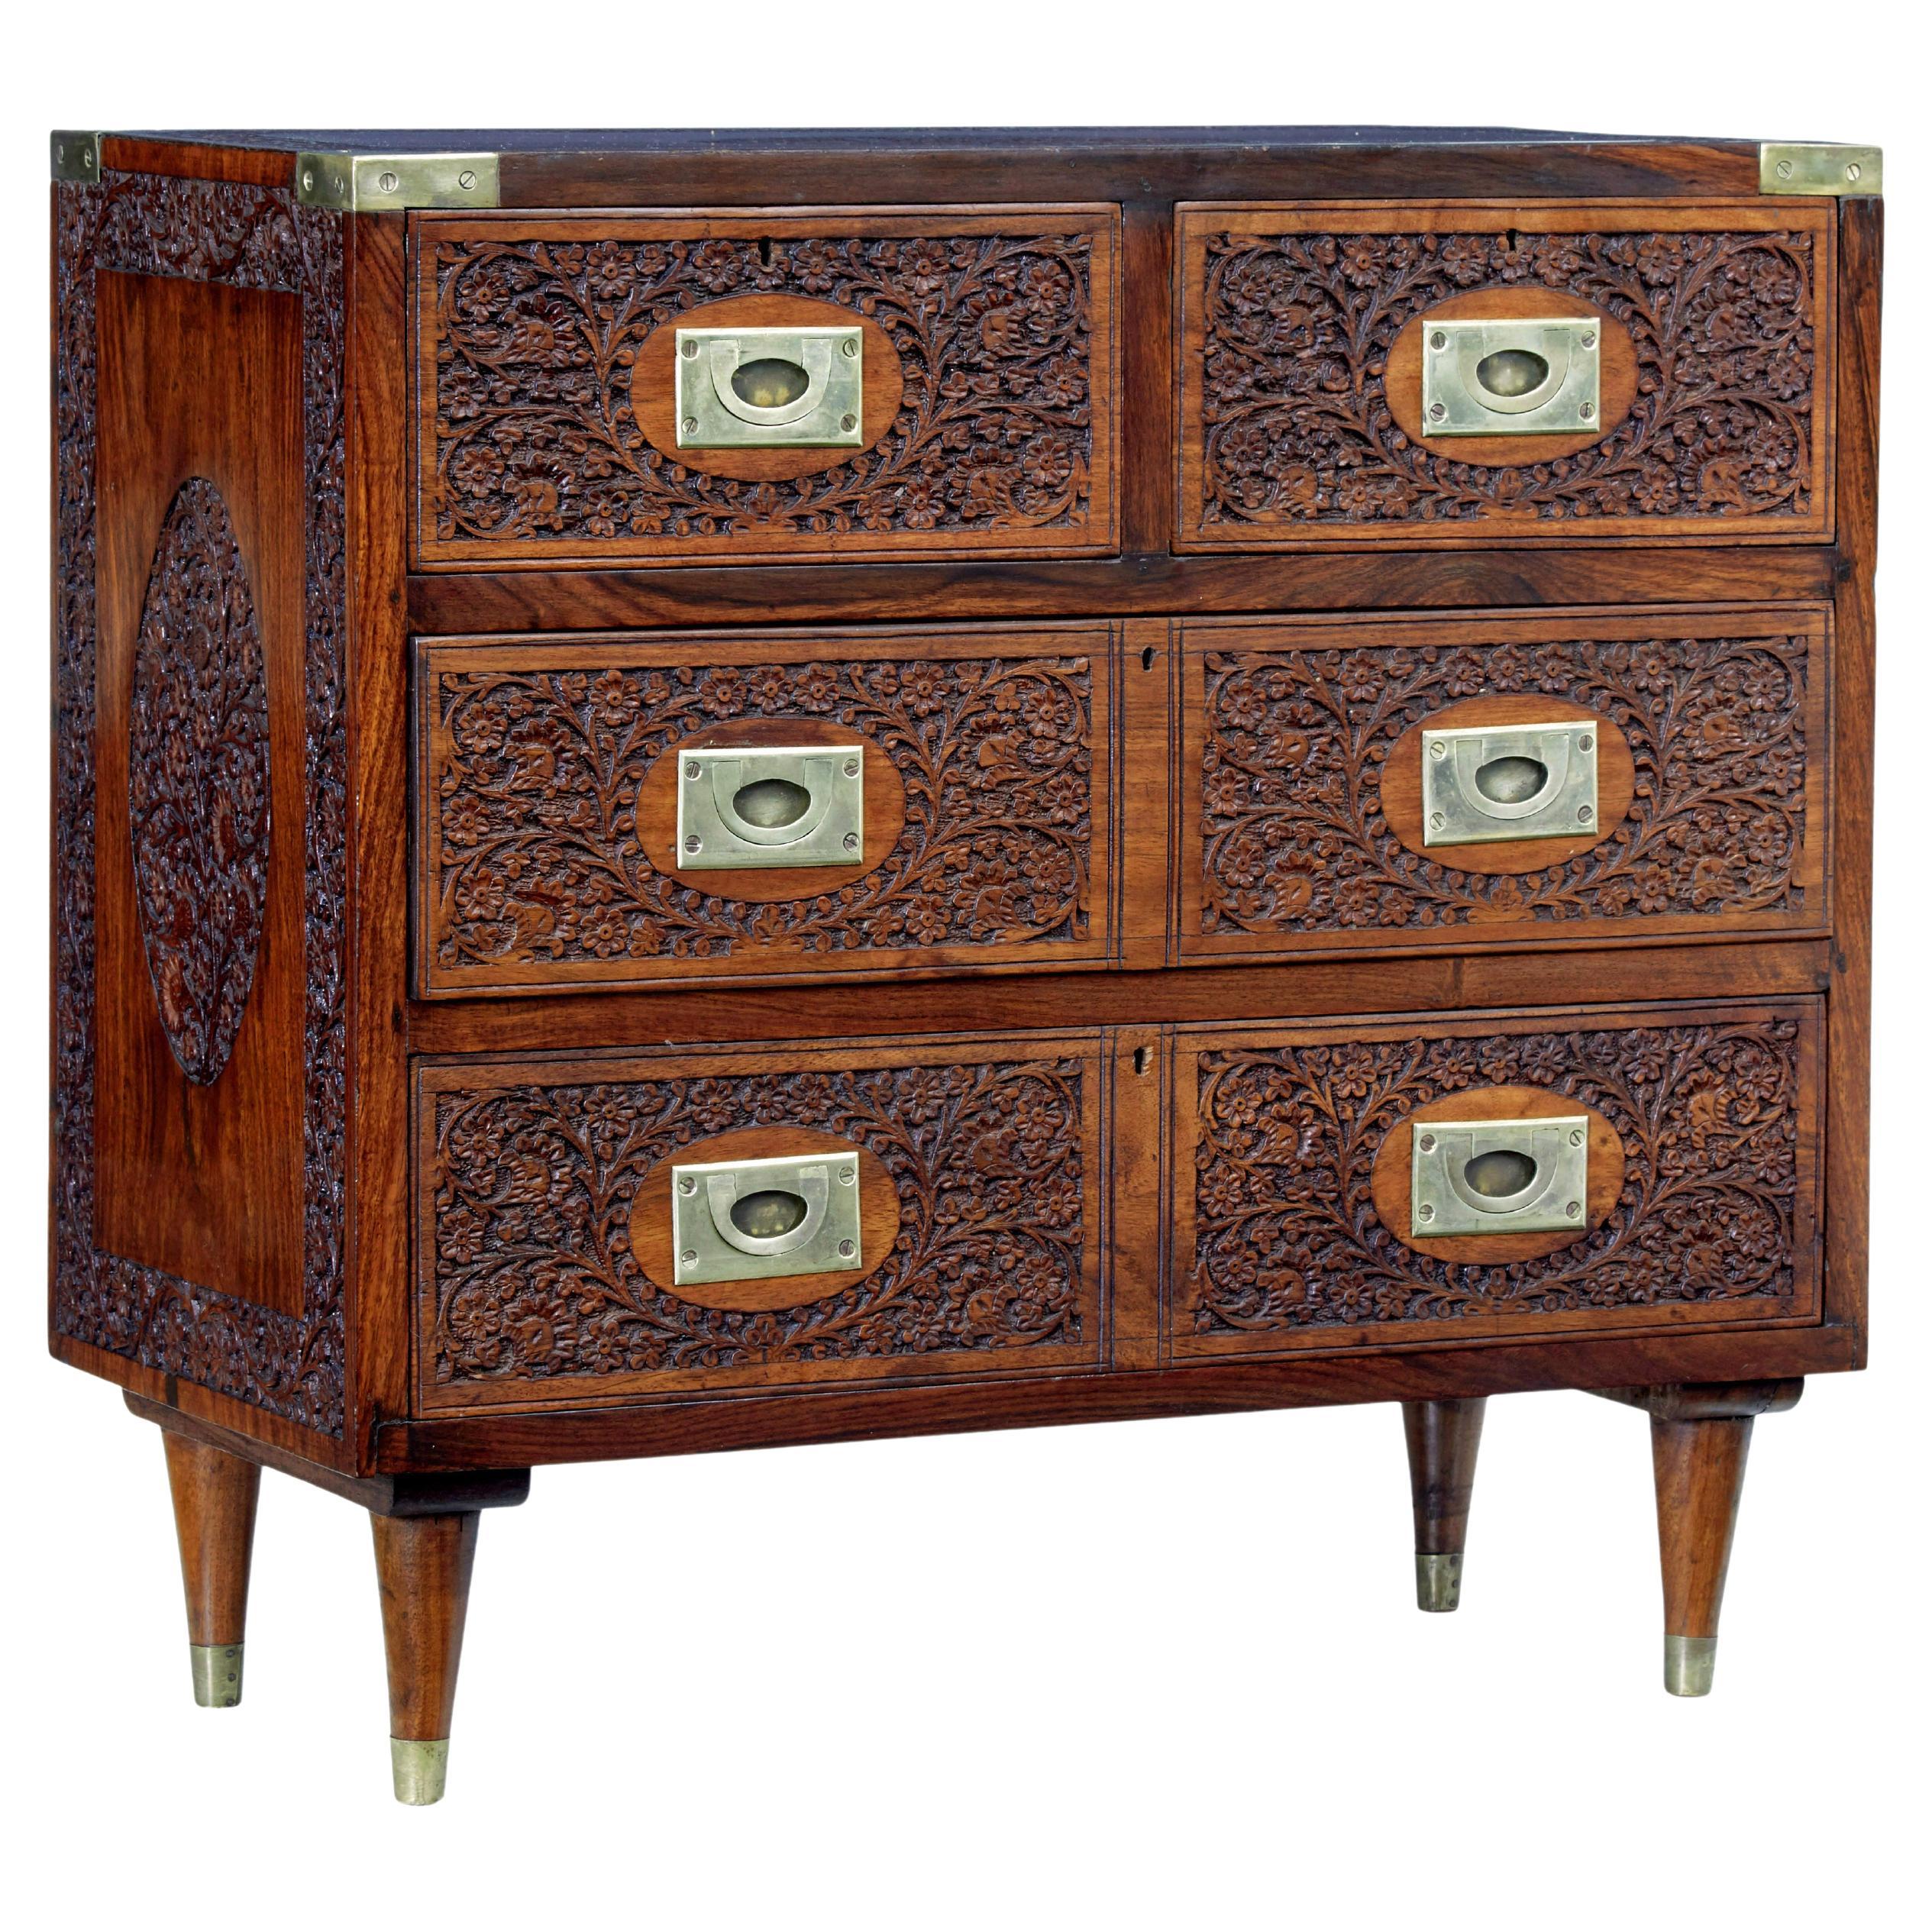 Mid 20th century carved chest of drawers by Fazal Rahim & Bros For Sale